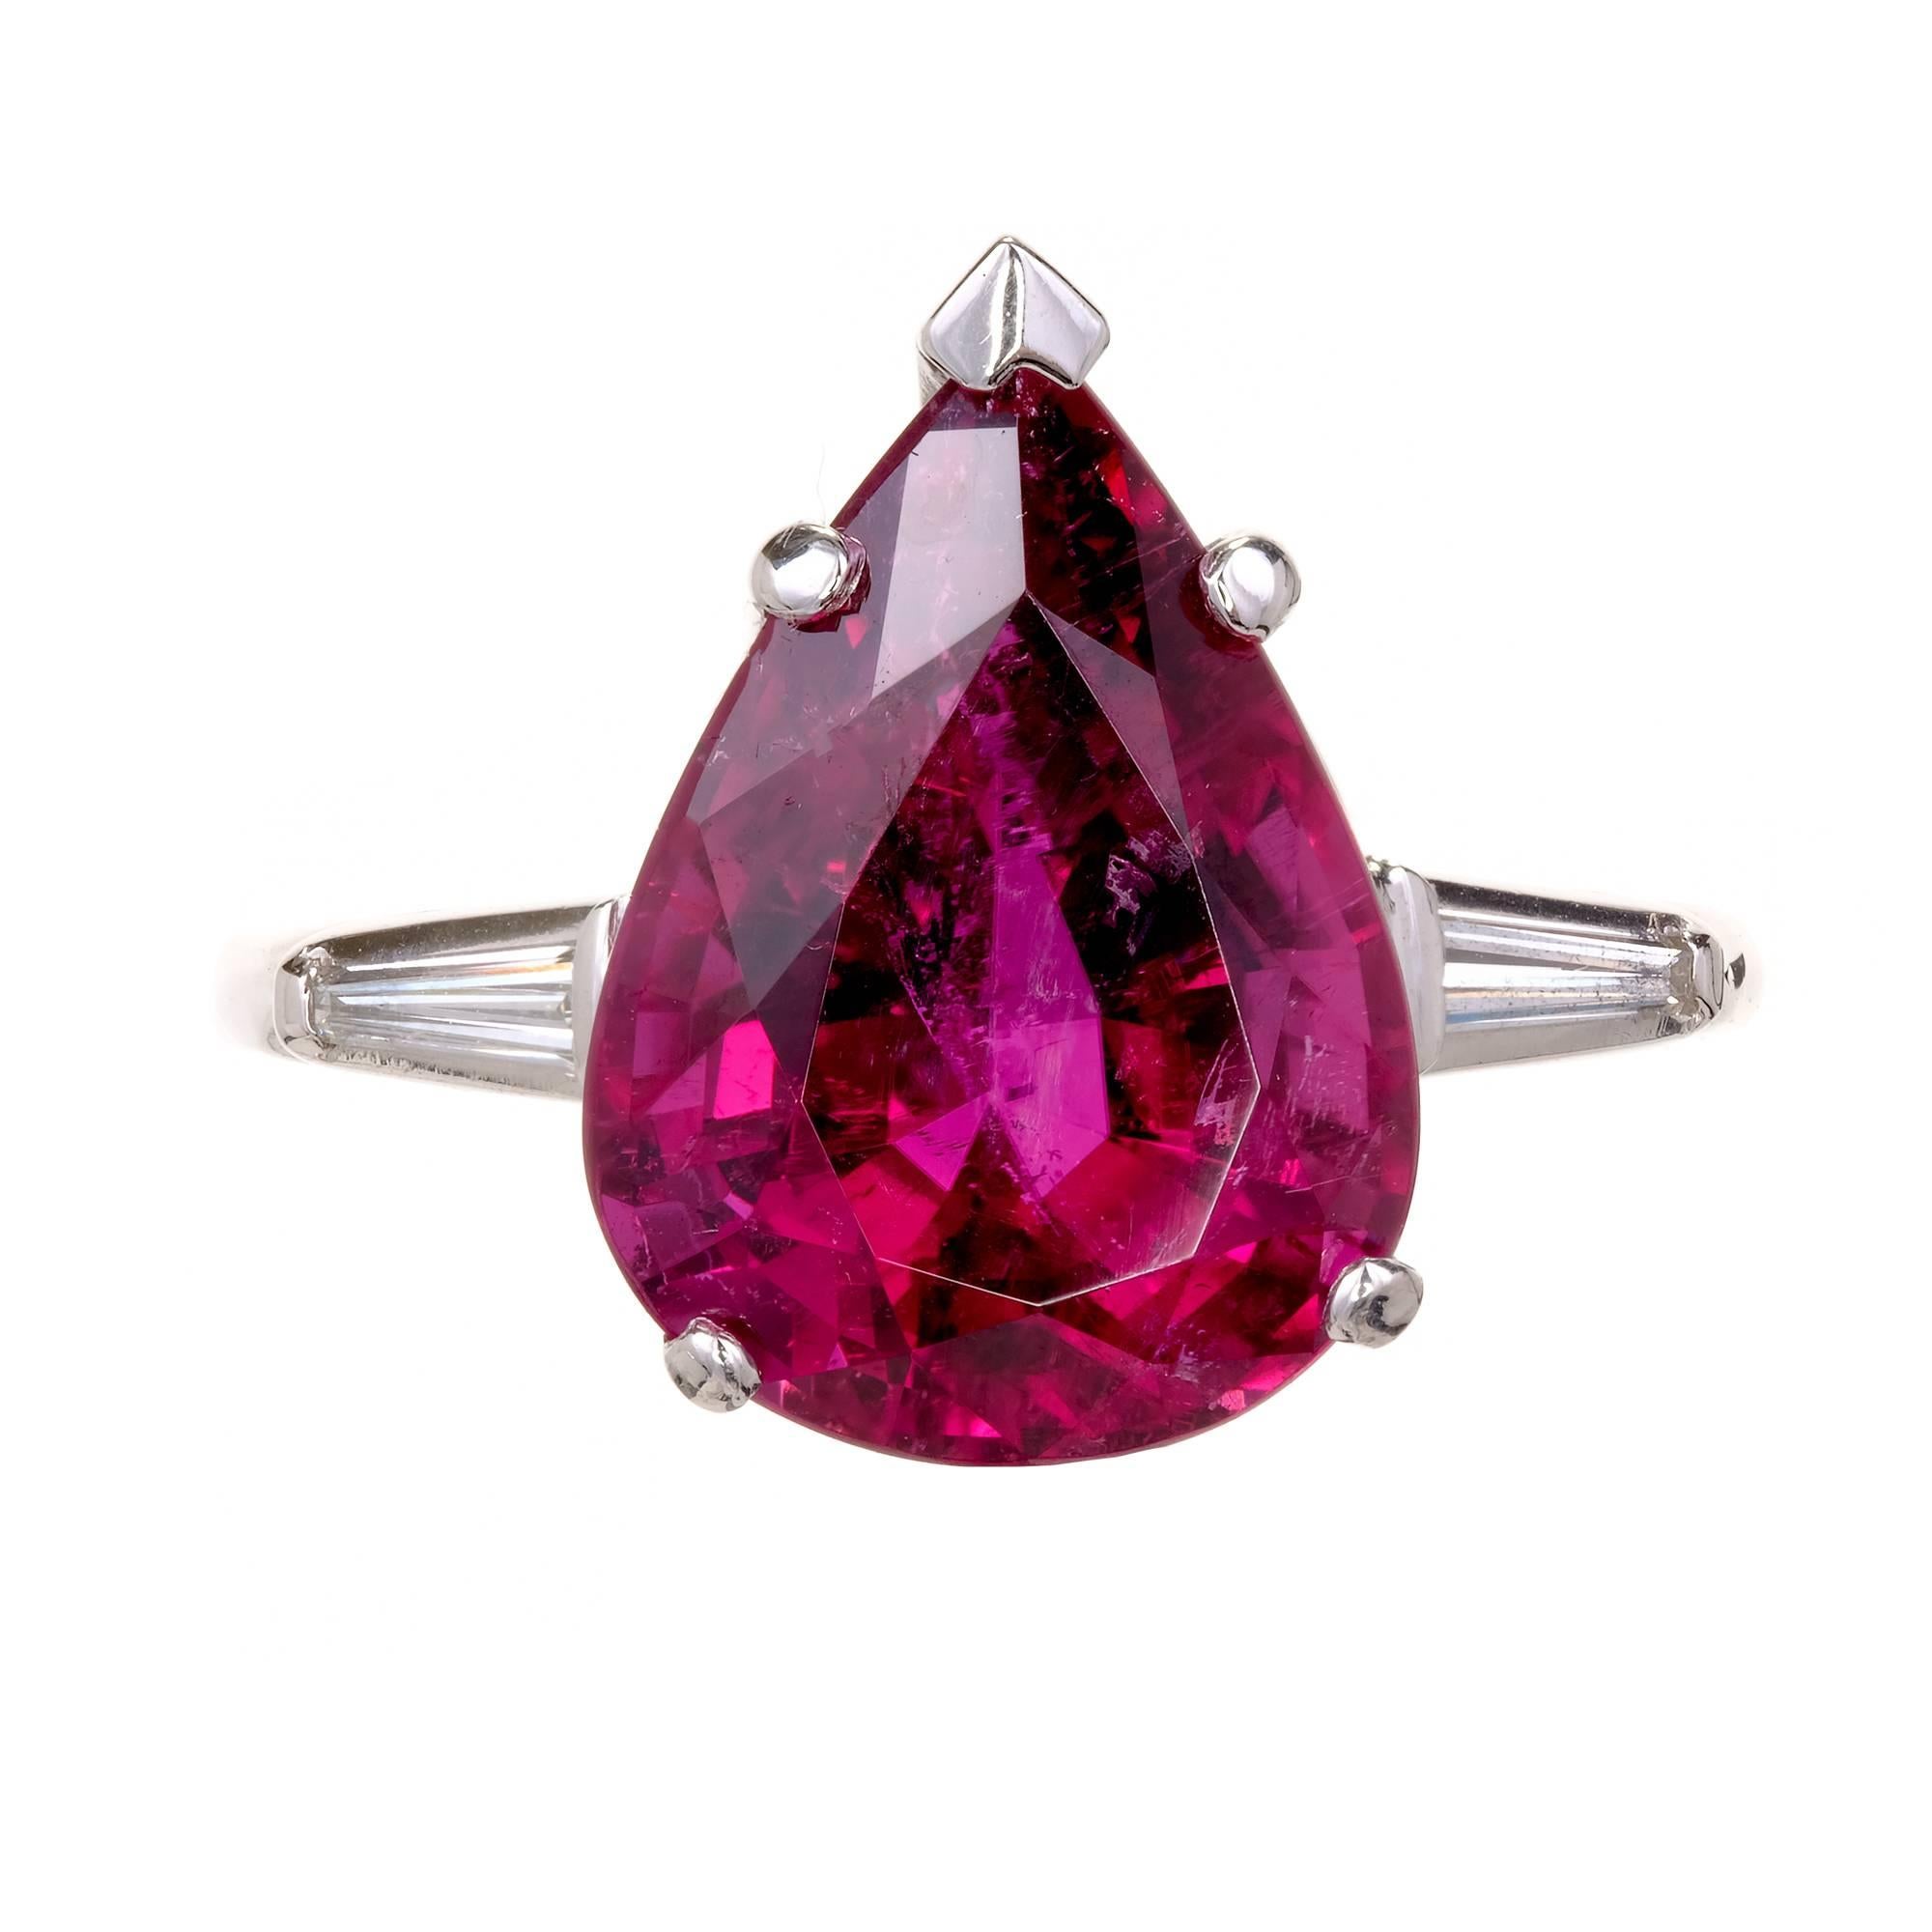 Mid-century large pear shaped three-stone gem red Rubellite Tourmaline Platinum cocktail ring with tapered baguette accents. 

1 pear shaped pink Rubellite Tourmaline, approx. total weight 6.95cts 
2 tapered baguette diamonds, approx. total weight